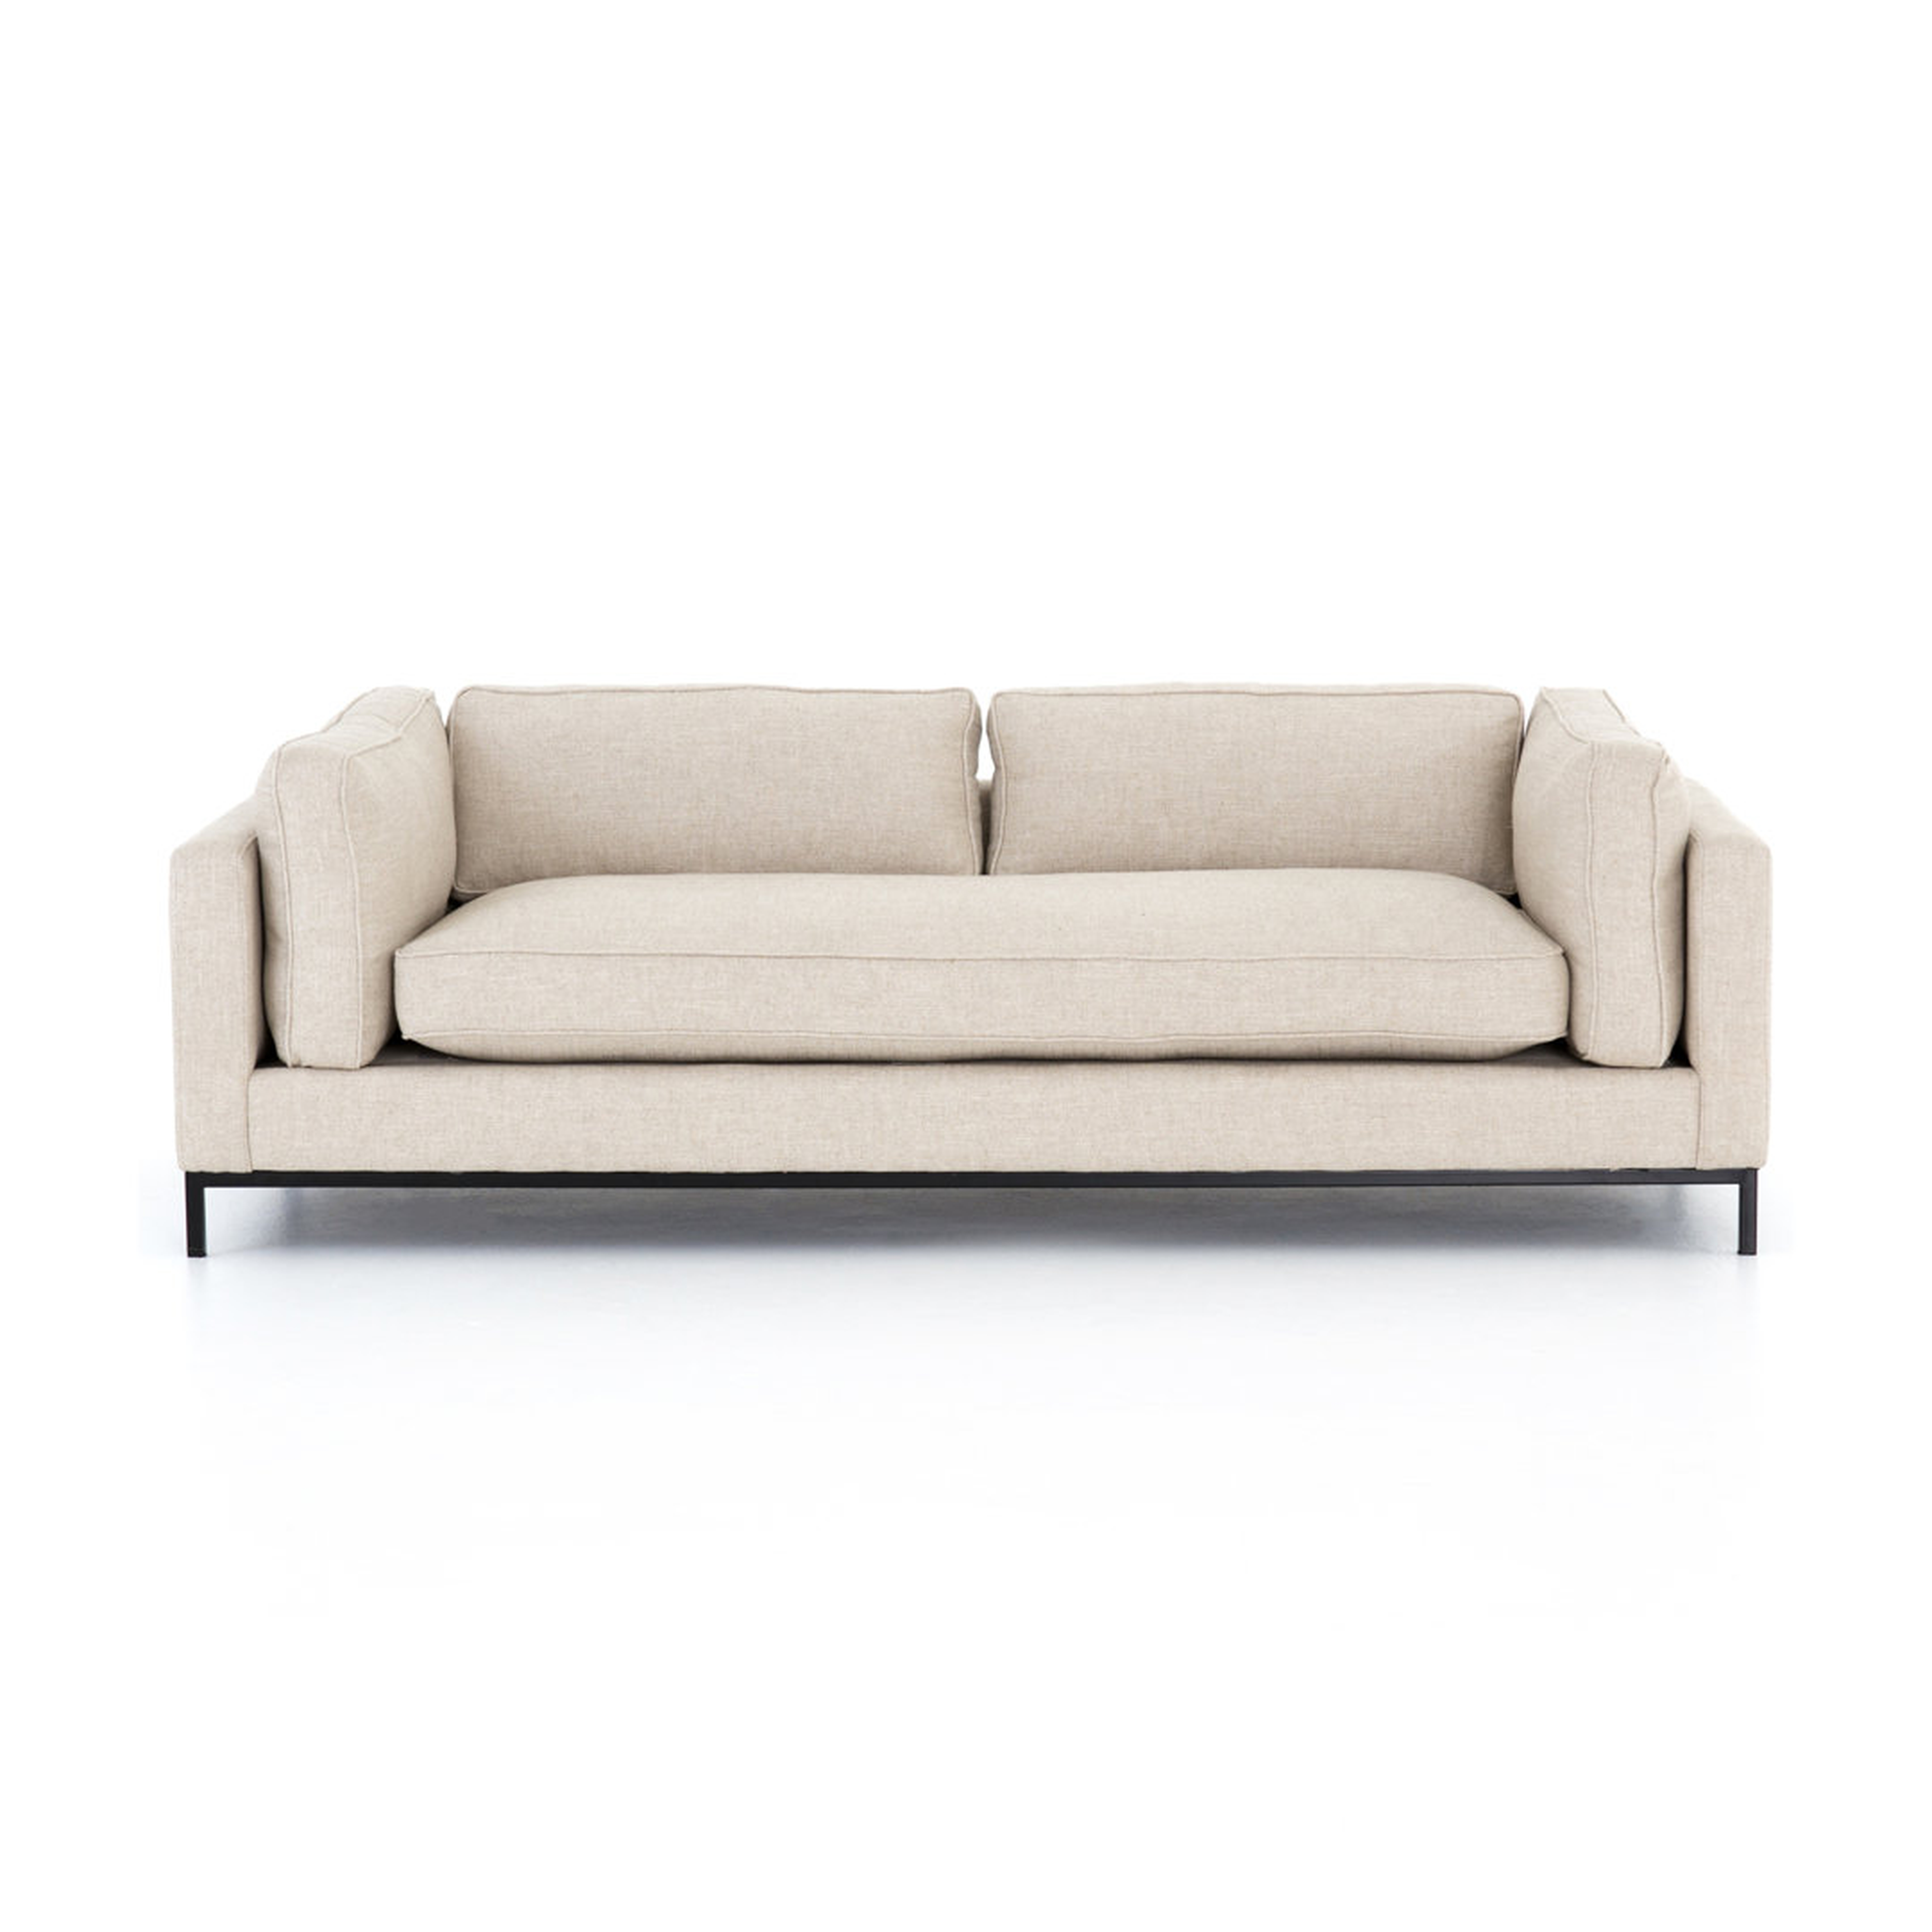 "Four Hands Grammercy 92"" Square Arm Sofa with Reversible Cushions" - Perigold